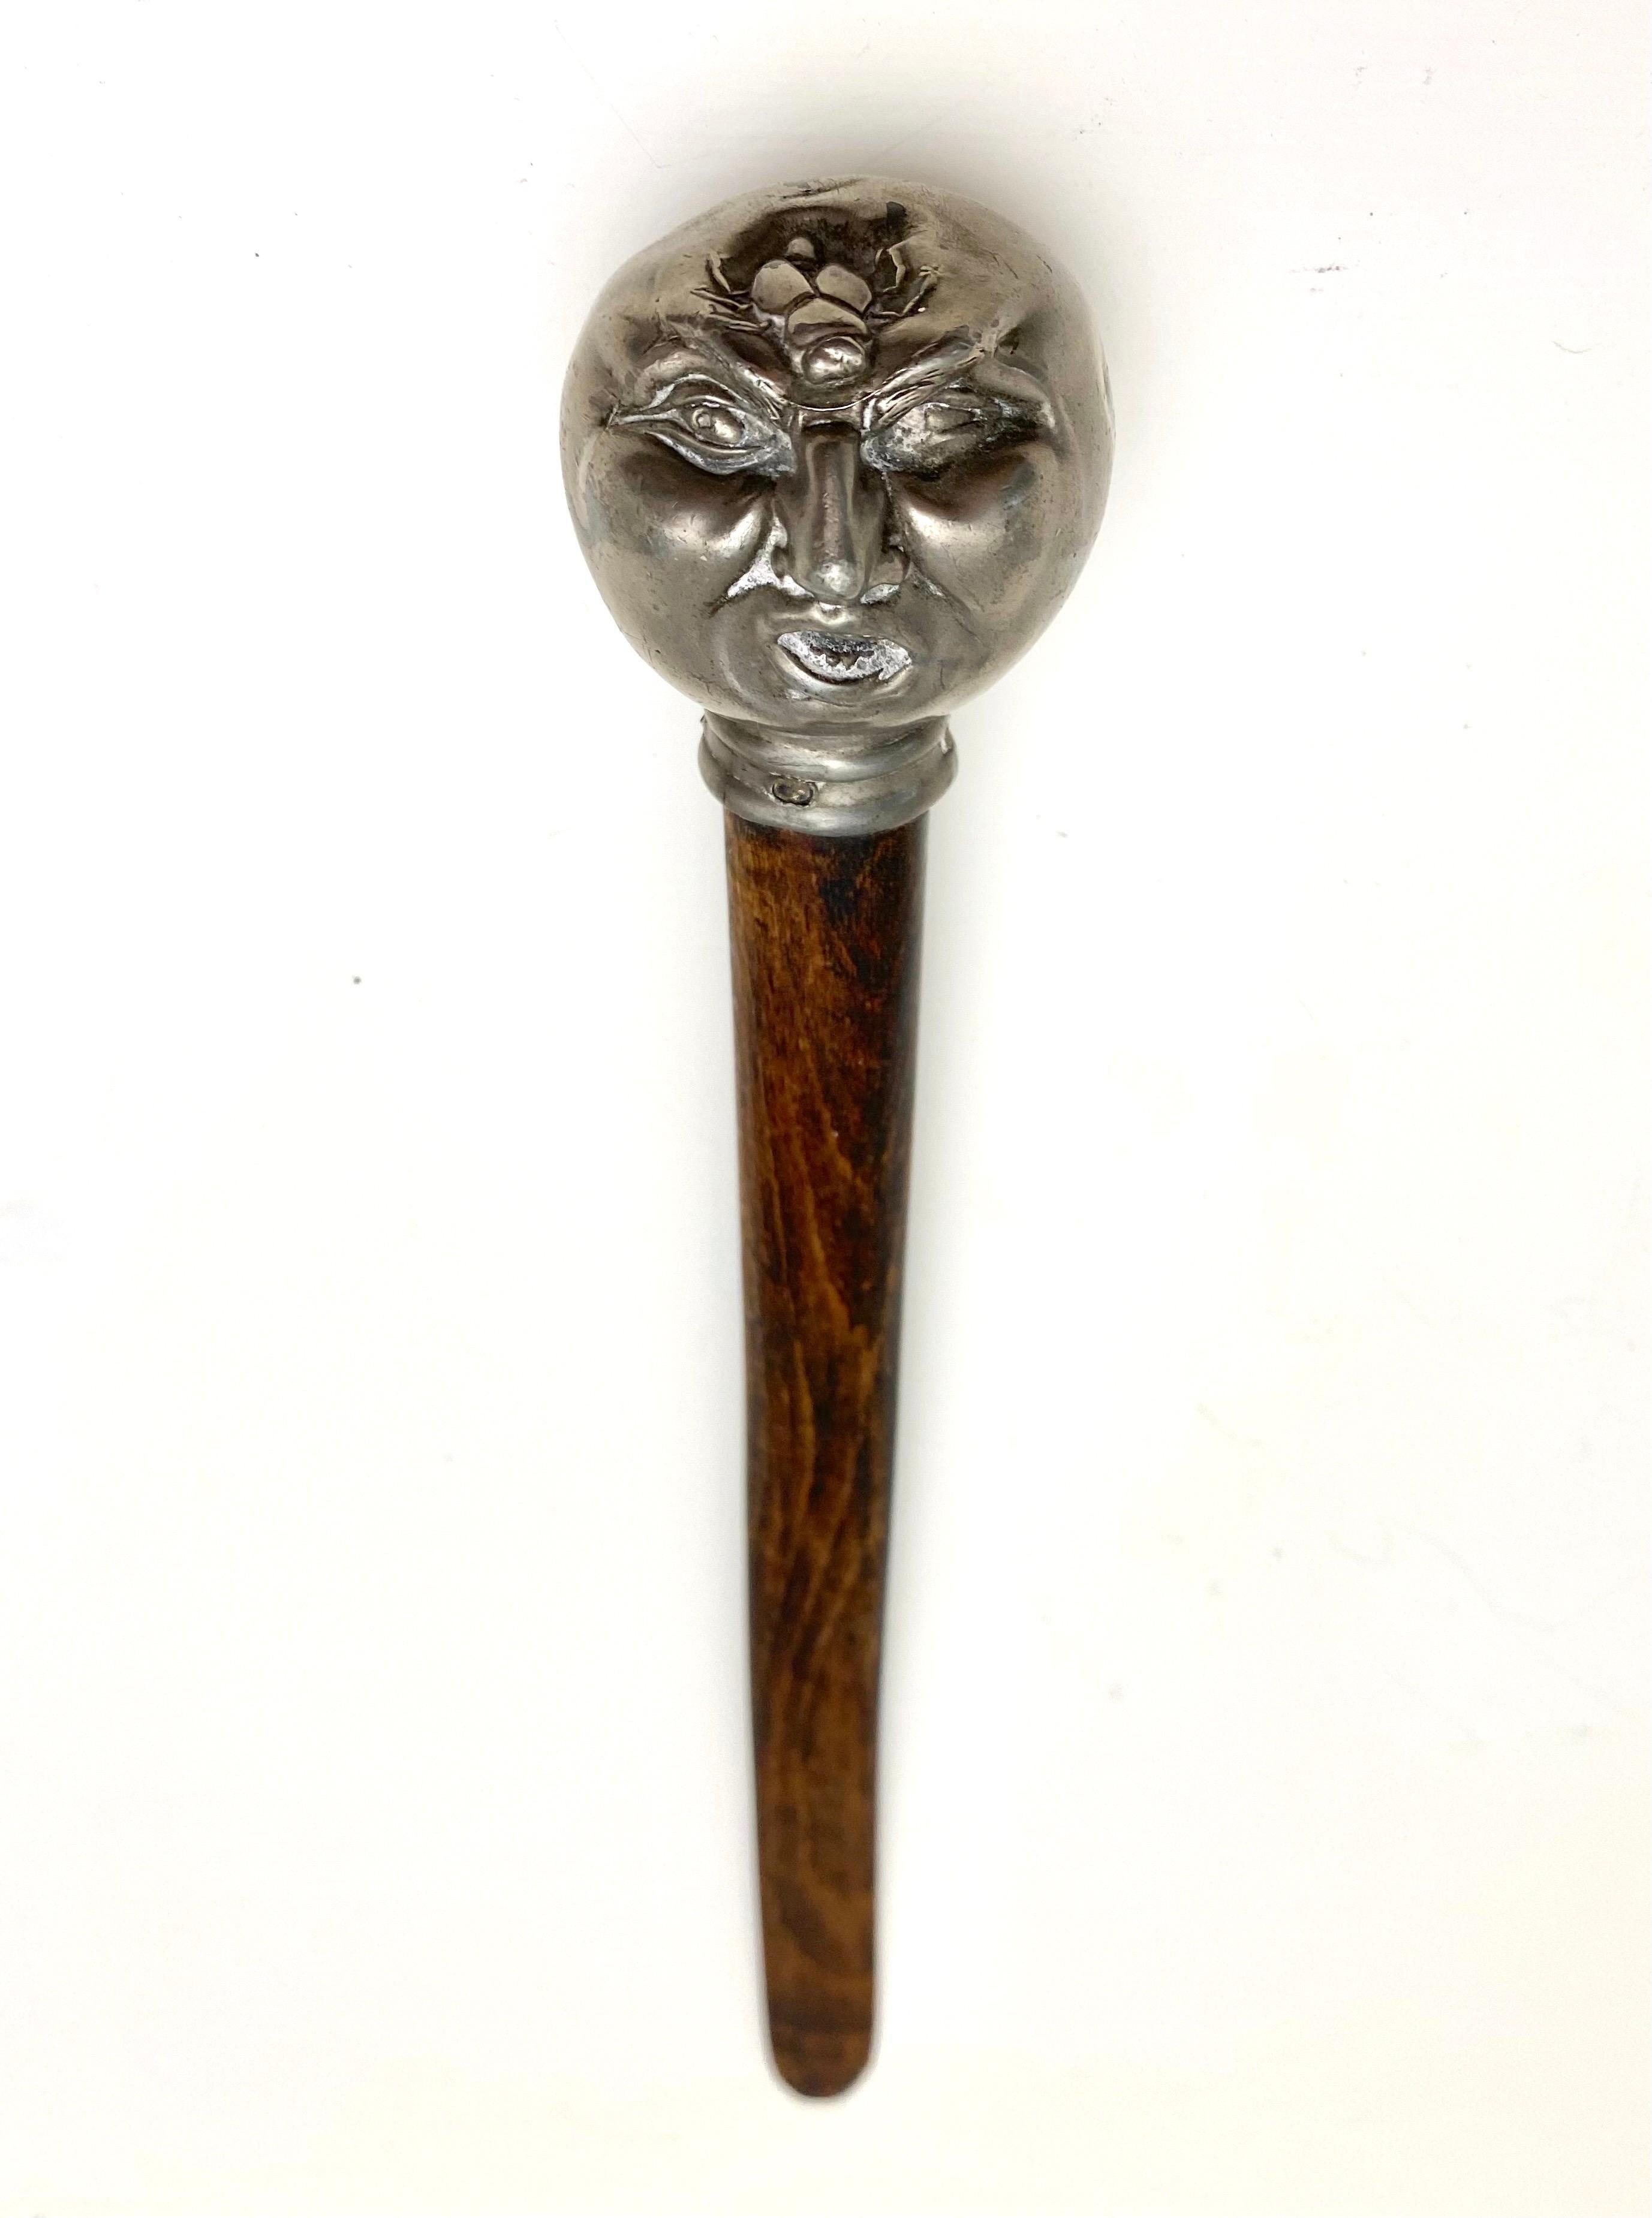 Figural Letter Opener with Fly on Man's Head For Sale 1